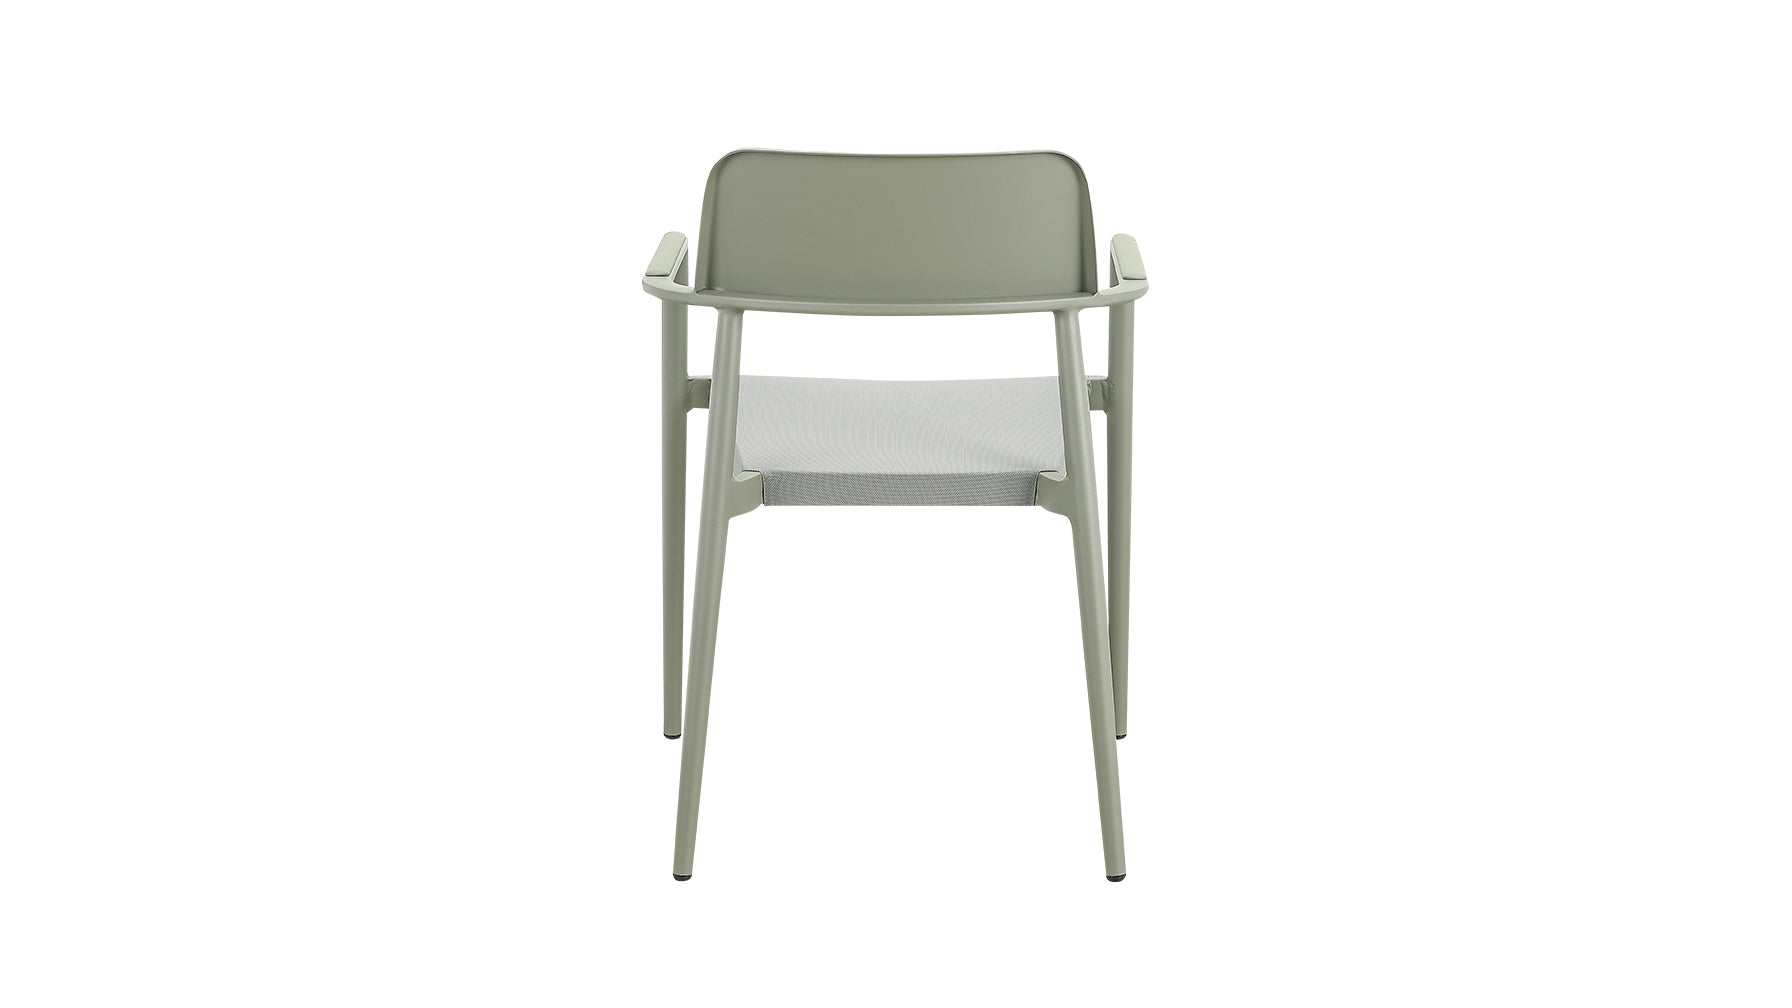 Best Of Me Outdoor Dining Chair (Set of Two), Olive Grey - Image 5